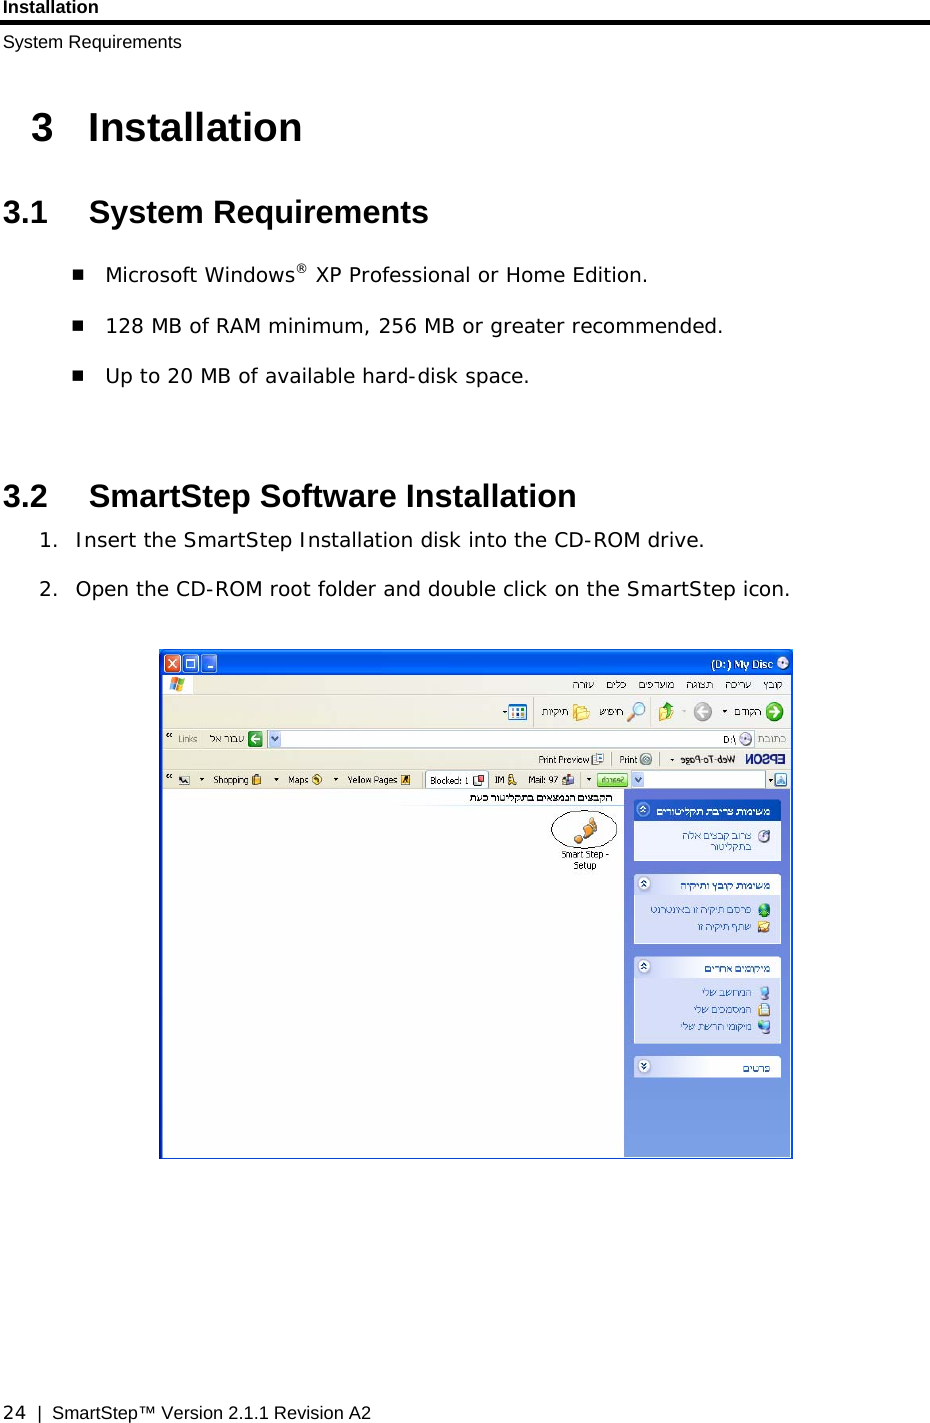 Installation System Requirements  24  |  SmartStep™ Version 2.1.1 Revision A2 3 Installation 3.1 System Requirements  Microsoft Windows® XP Professional or Home Edition.  128 MB of RAM minimum, 256 MB or greater recommended.   Up to 20 MB of available hard-disk space.   3.2  SmartStep Software Installation 1. Insert the SmartStep Installation disk into the CD-ROM drive.  2. Open the CD-ROM root folder and double click on the SmartStep icon.            